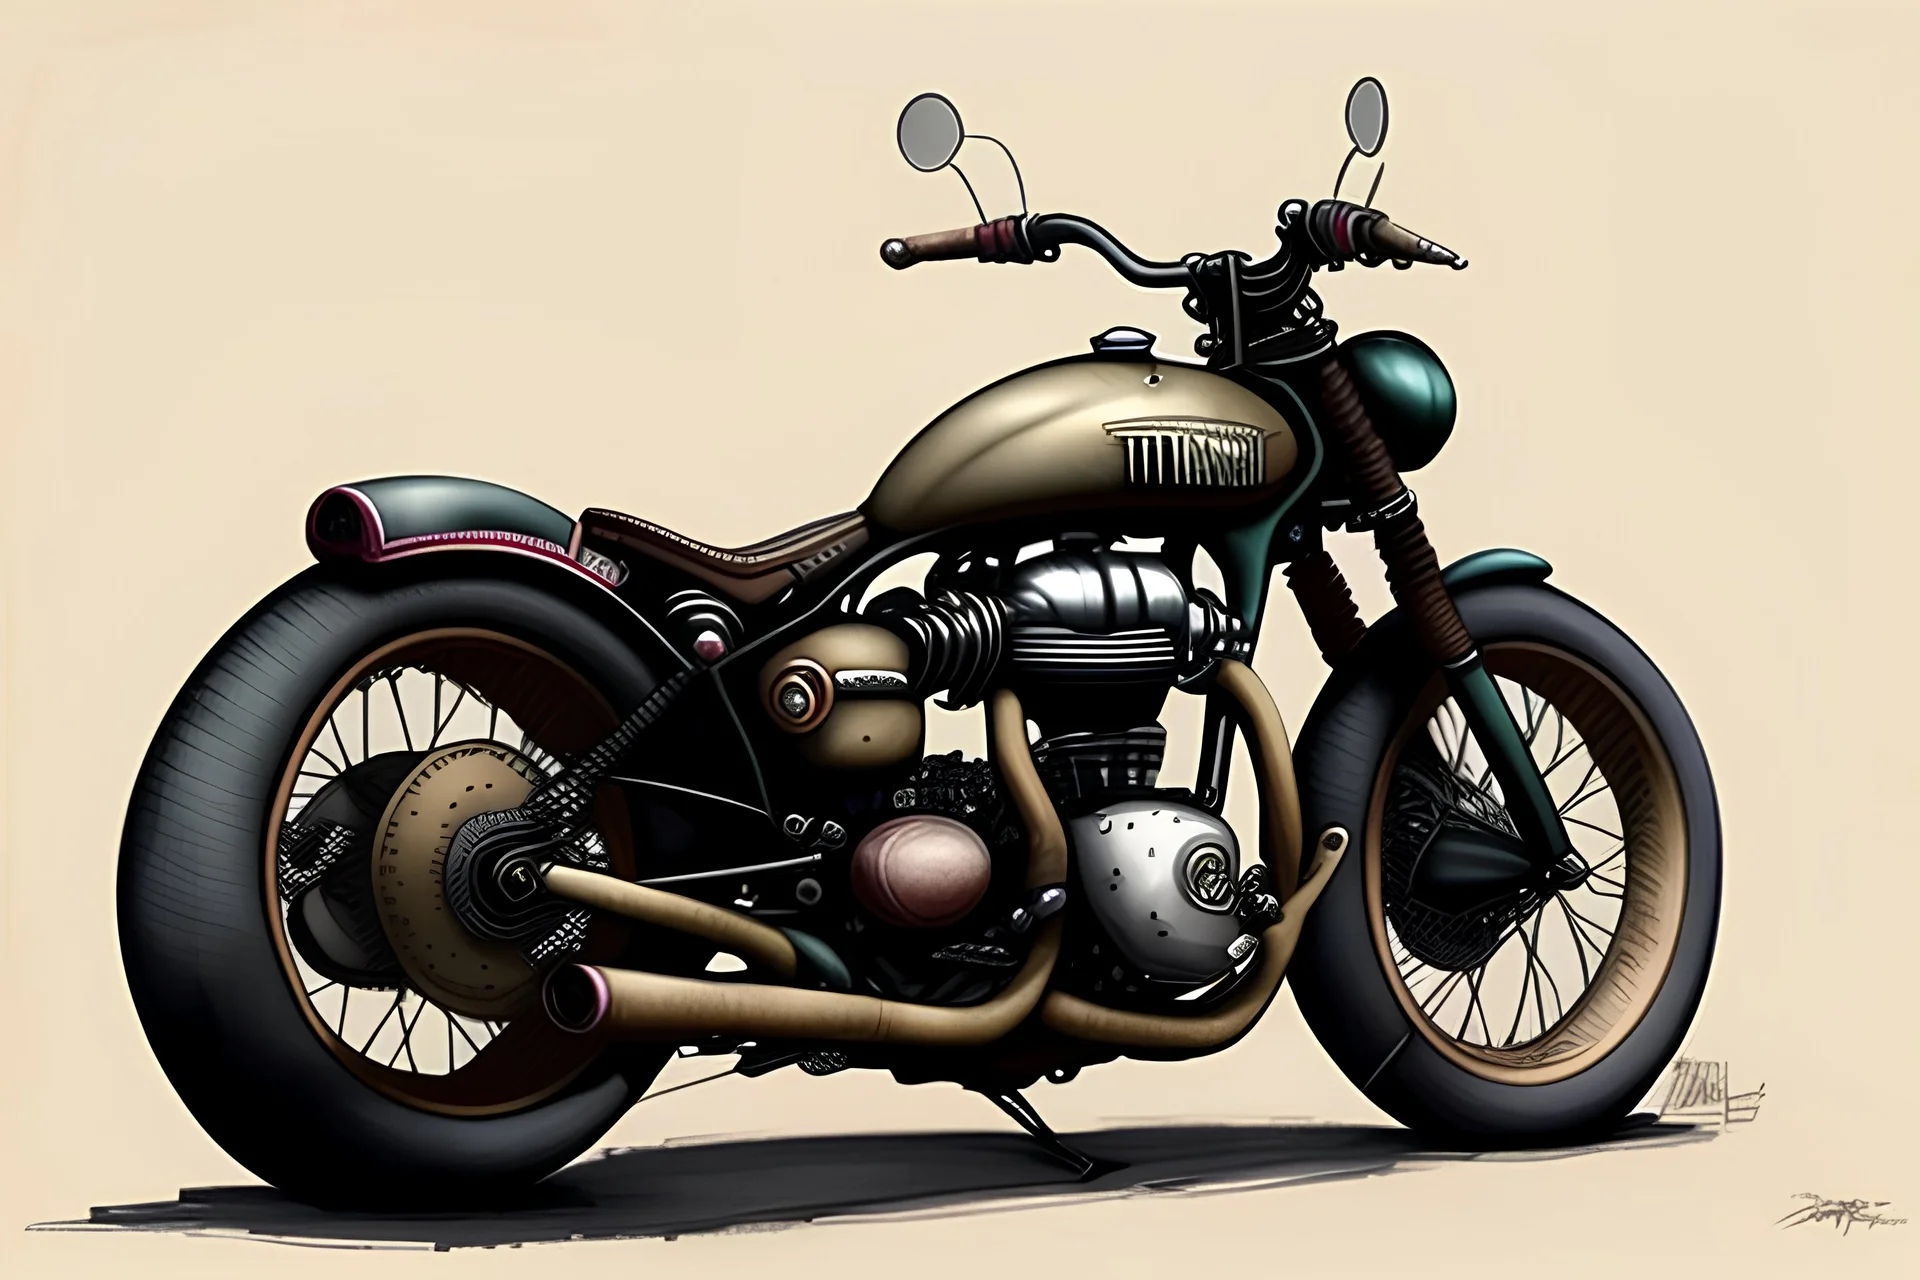 a classic ((((( triumph rat rod style bobber ))))), muted colors, intricate, detailed, centered, pivot on triumph, by jean-baptiste monge